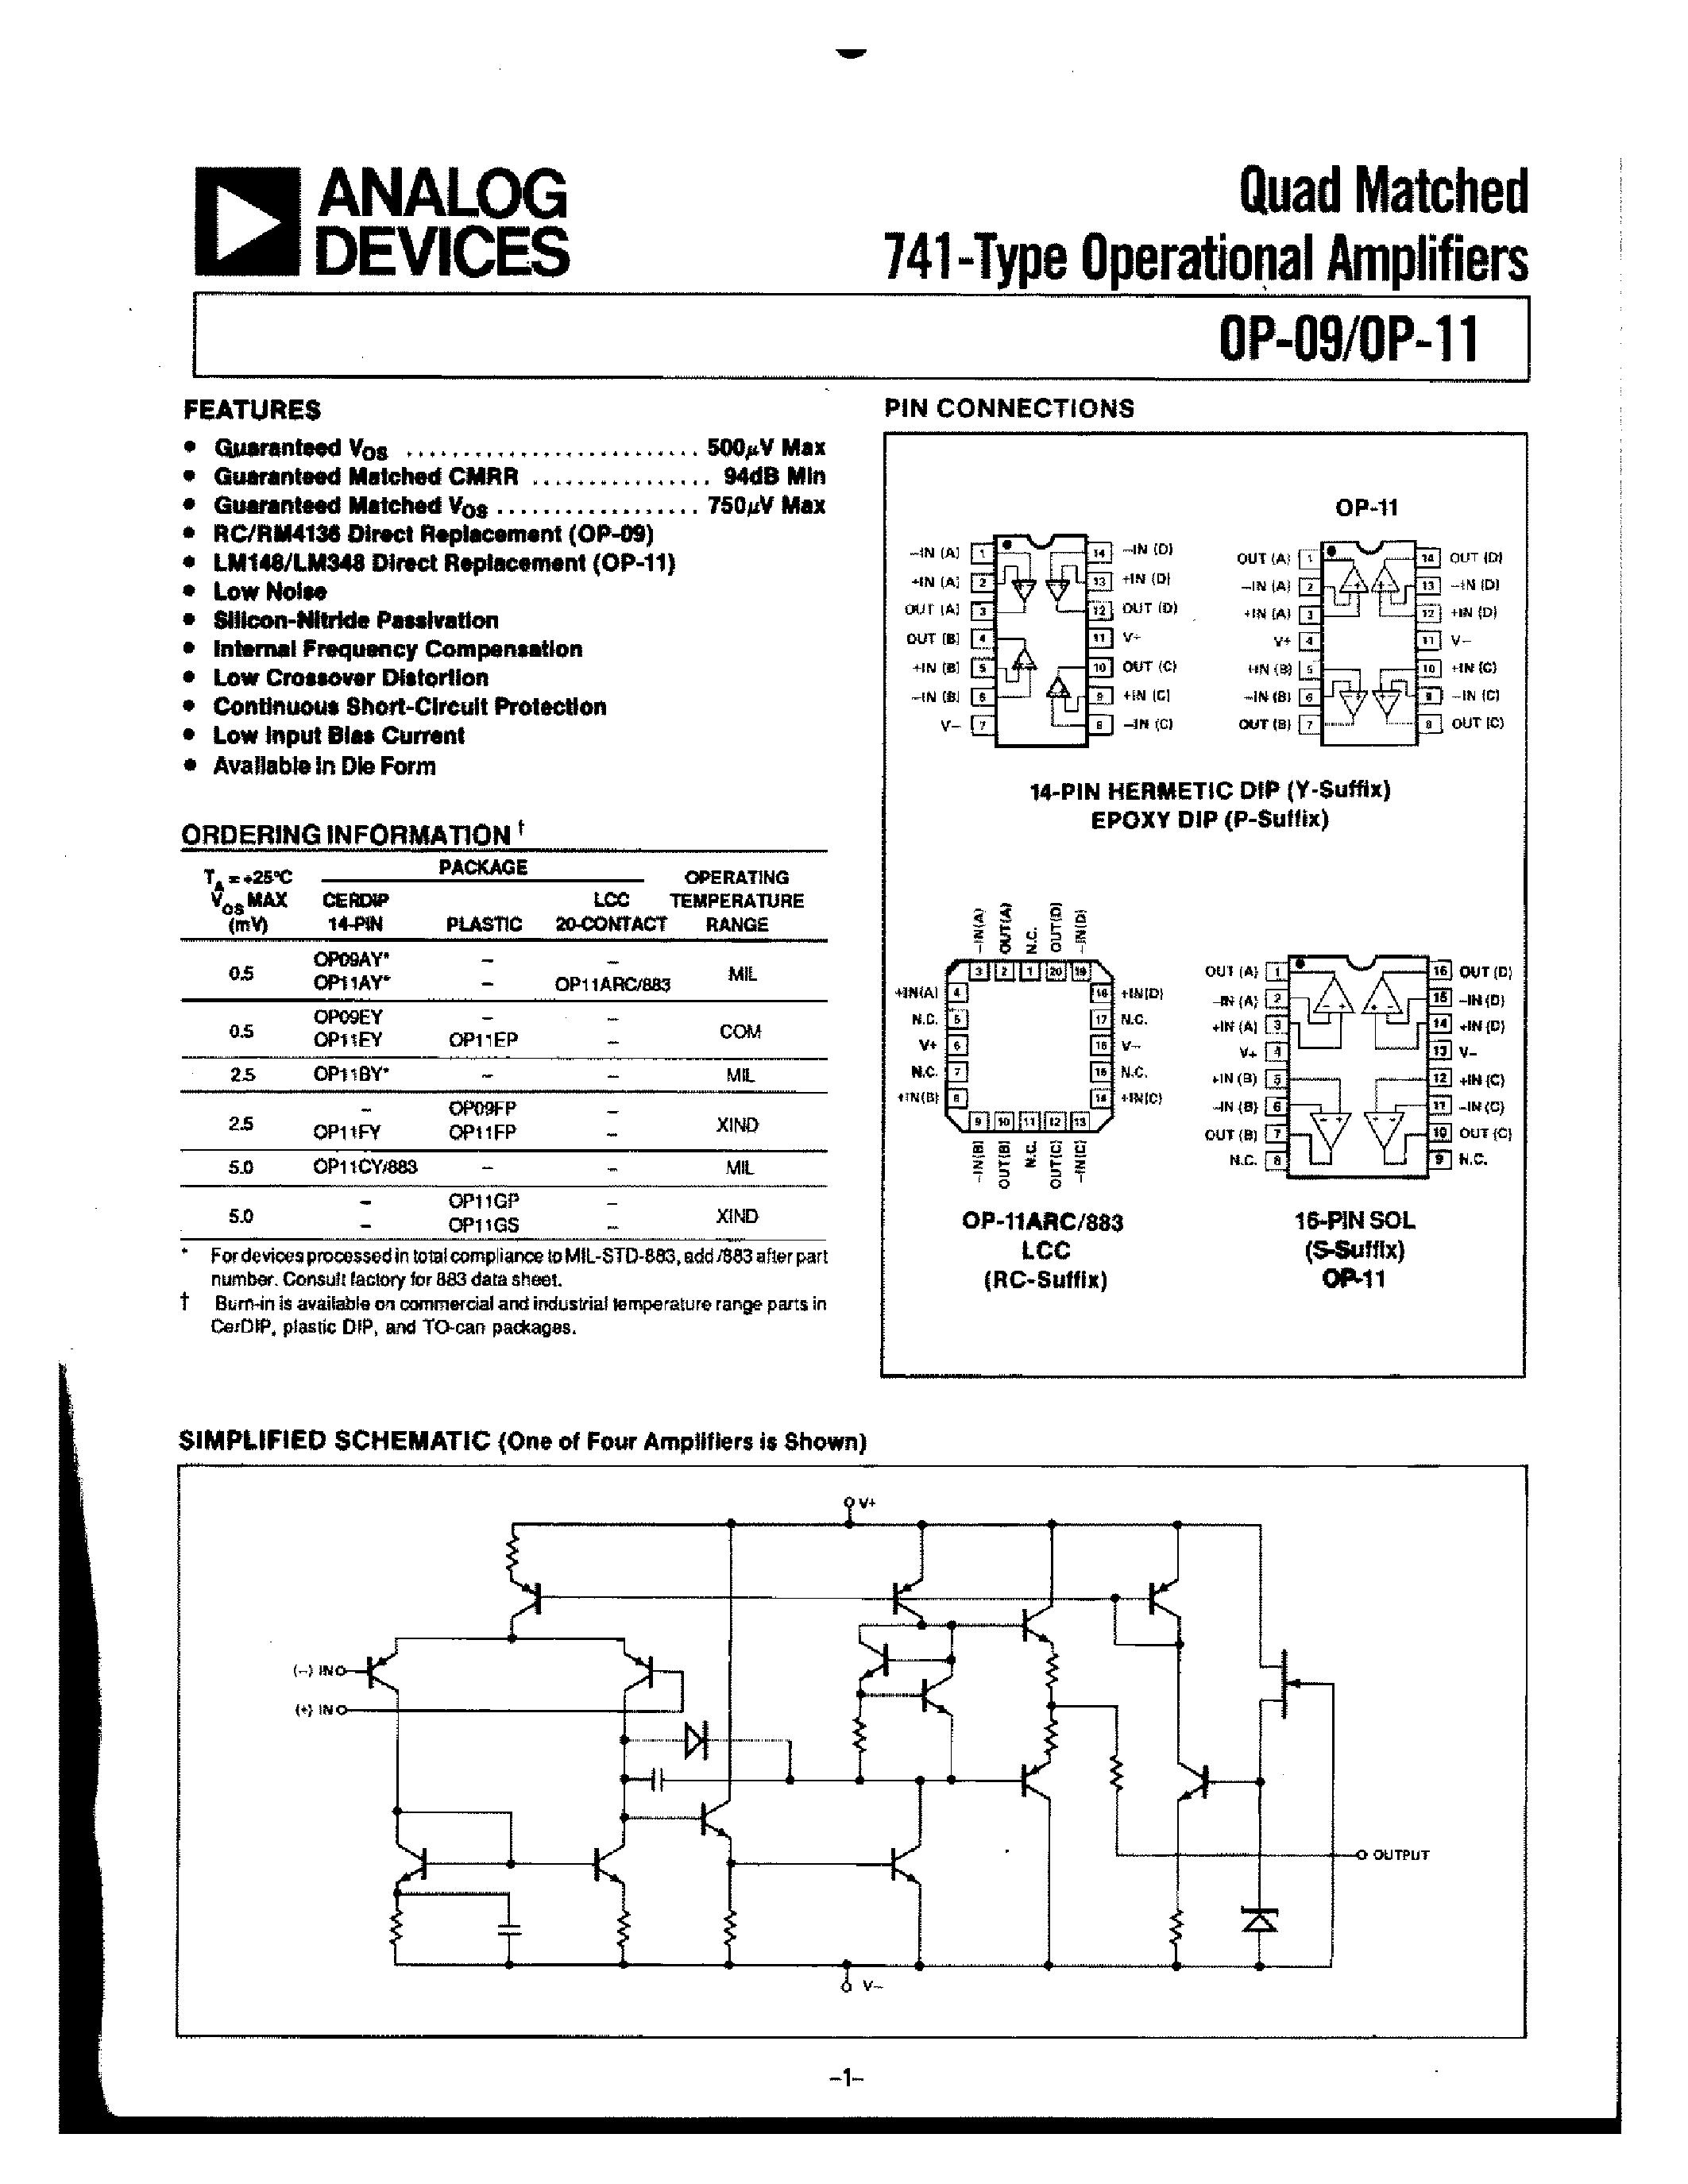 Datasheet OP09 - Quad Matched 741-Type Operational Amplifiers page 1